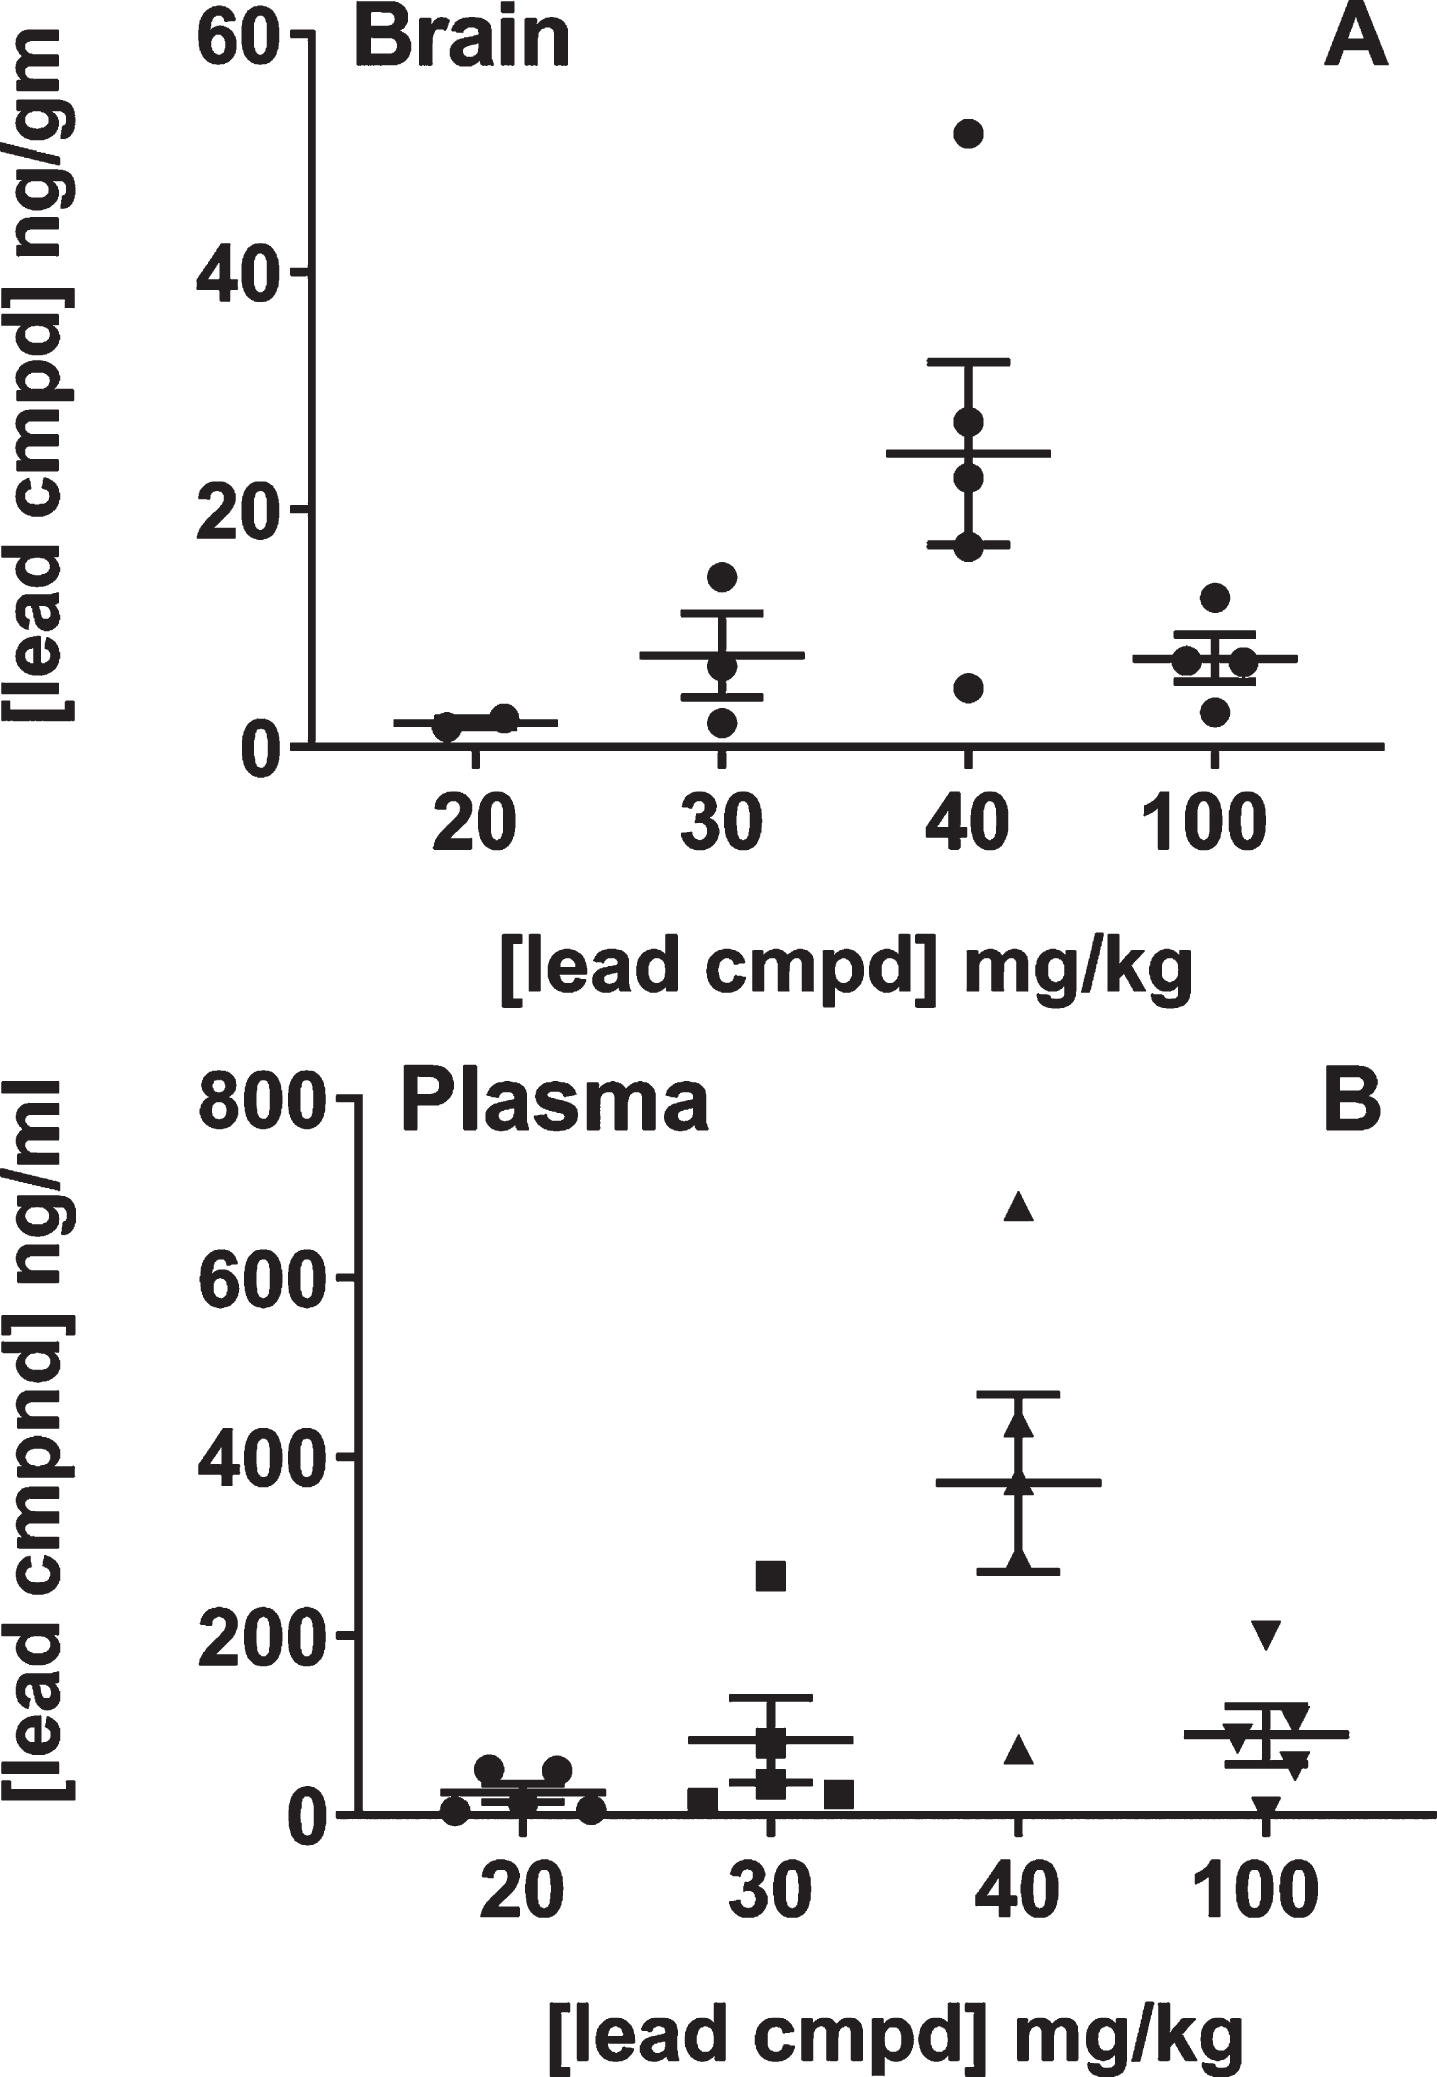 Analysis of brain and plasma levels of lead compound with respect to formulated doses in feed. Groups of male C57BL/6 mice (n = 5) were treated with feed formulated to provide the doses shown on the plot for seven days. Mice were individually caged on the last two days in order to determine the amount of feed each mouse consumed (Murigenics, Vallejo, CA) prior to analyzing compound levels in the brain (A) and plasma (B) by LC-MS/MS (Quintara Discovery, Hayward, CA). Values below quantifiable levels were not included in the groups treated with 20, 30, or 100 mg/kg doses.